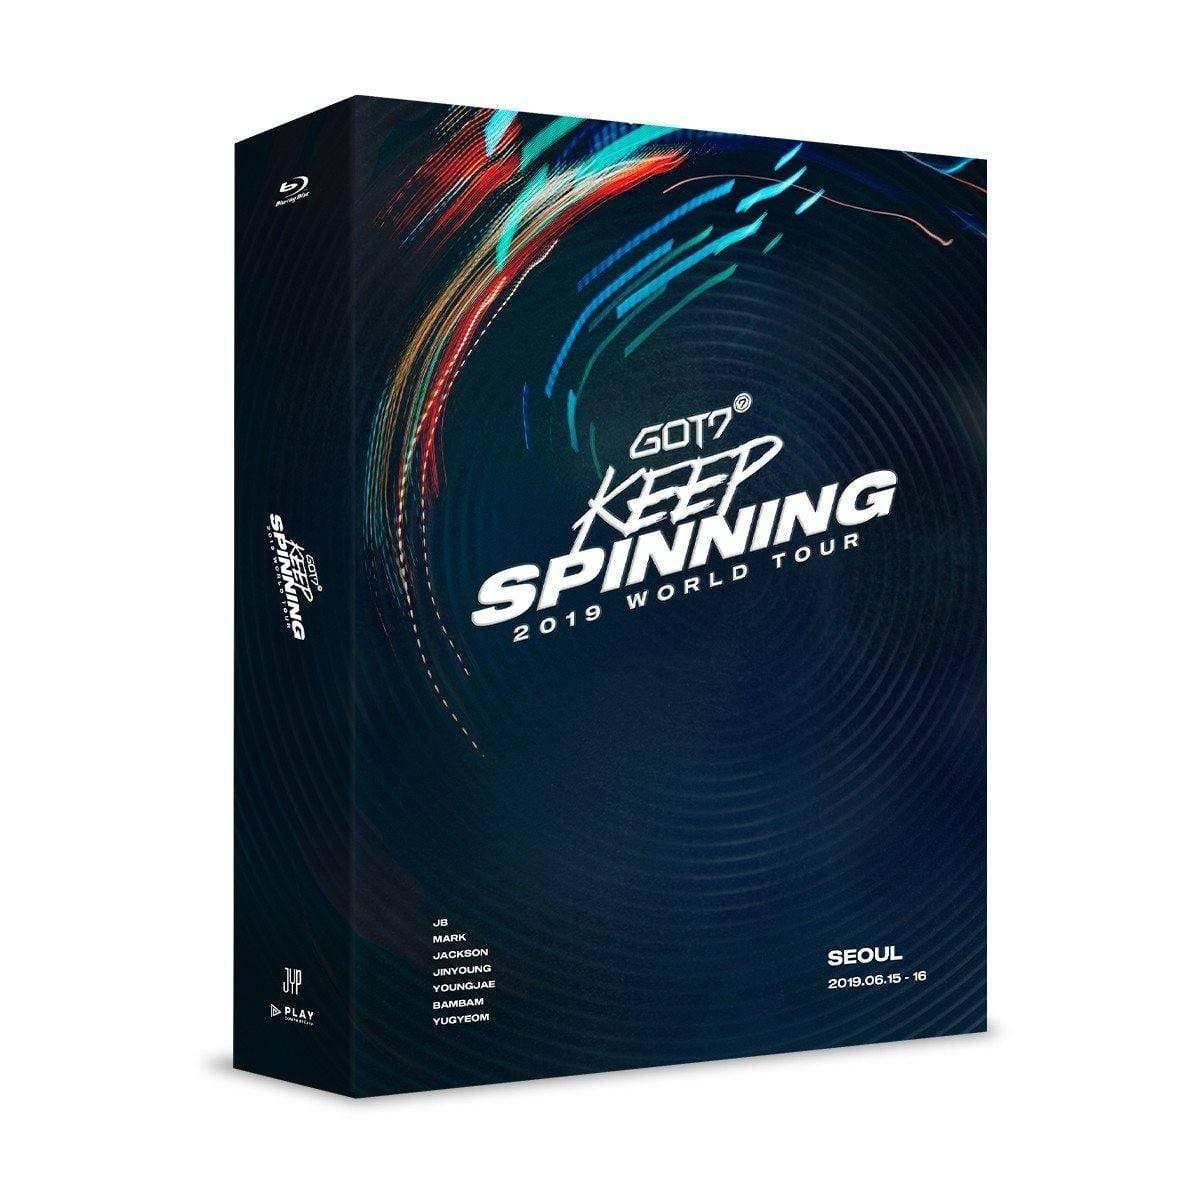 GOT7 2019 WORLD TOUR ‘KEEP SPINNING’ IN SEOUL - Blu-ray - KAVE SQUARE